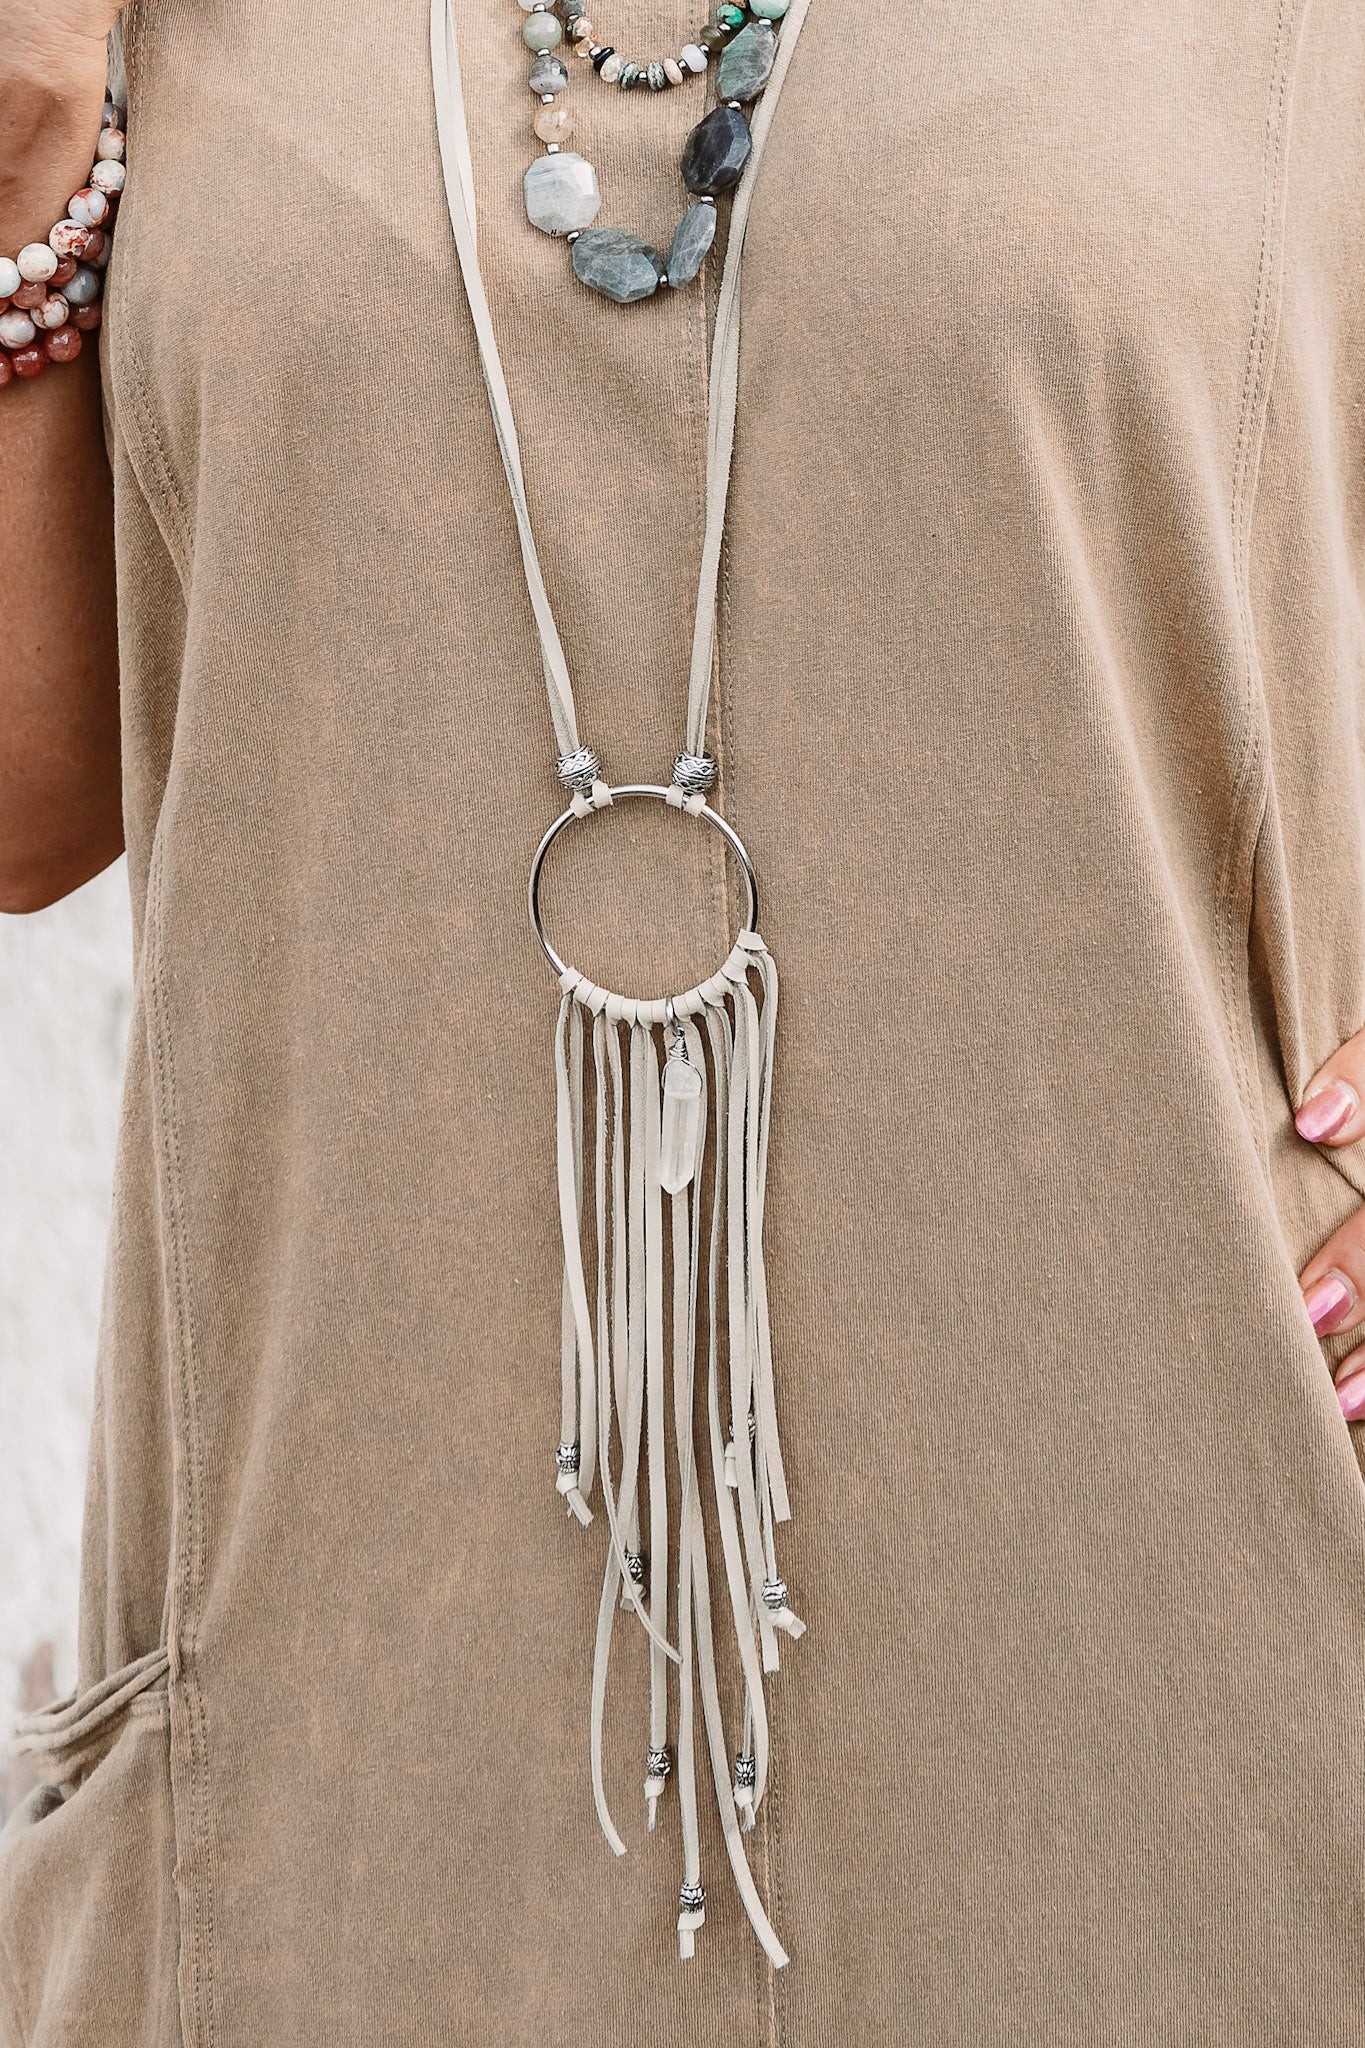 Load image into Gallery viewer, Dream Catcher Quartz Necklace in Yellow - SpiritedBoutiques Boho Hippie Boutique Style Necklace, Spirit Lala Boho
